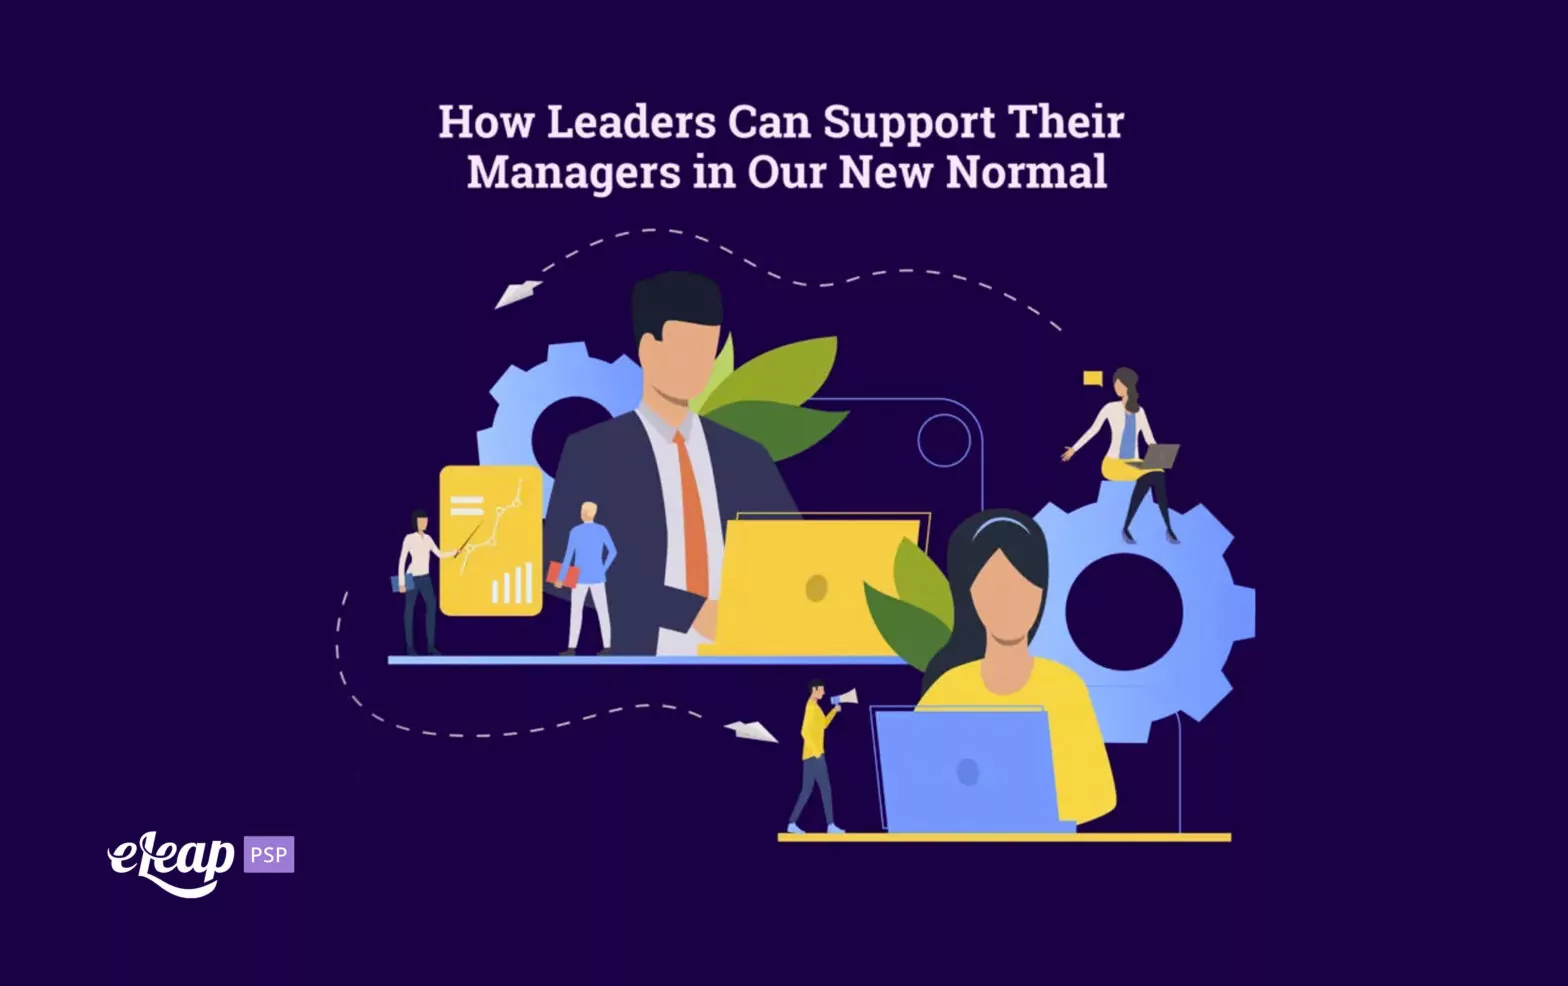 How Leaders Can Support Their Managers in Our New Normal